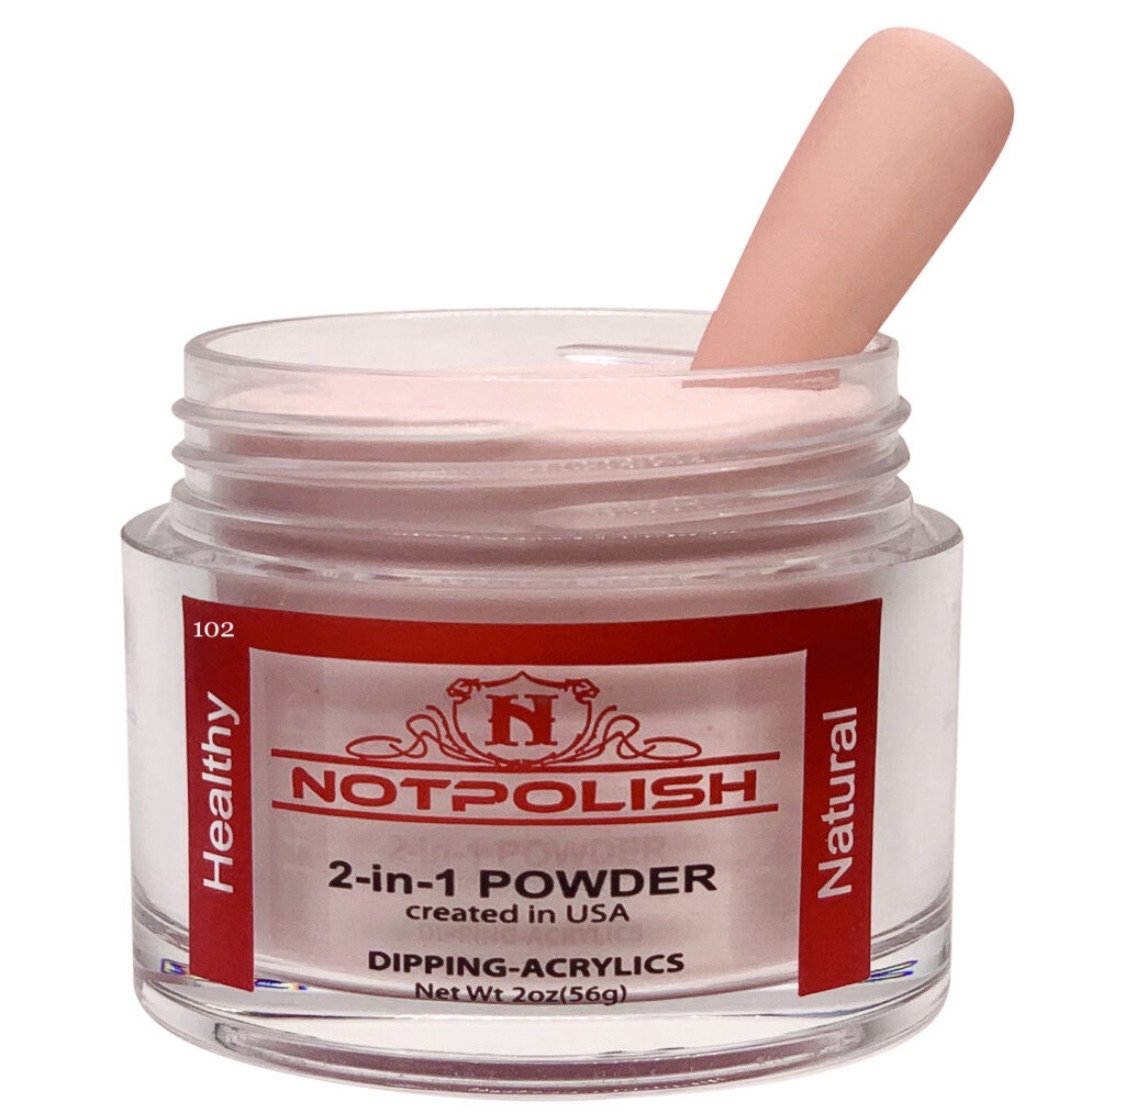 Notpolish 2-in-1 acrylic + dipping powder ;Can be use as dip, or with monomer as acrylic;  Made in USA; Size 2oz